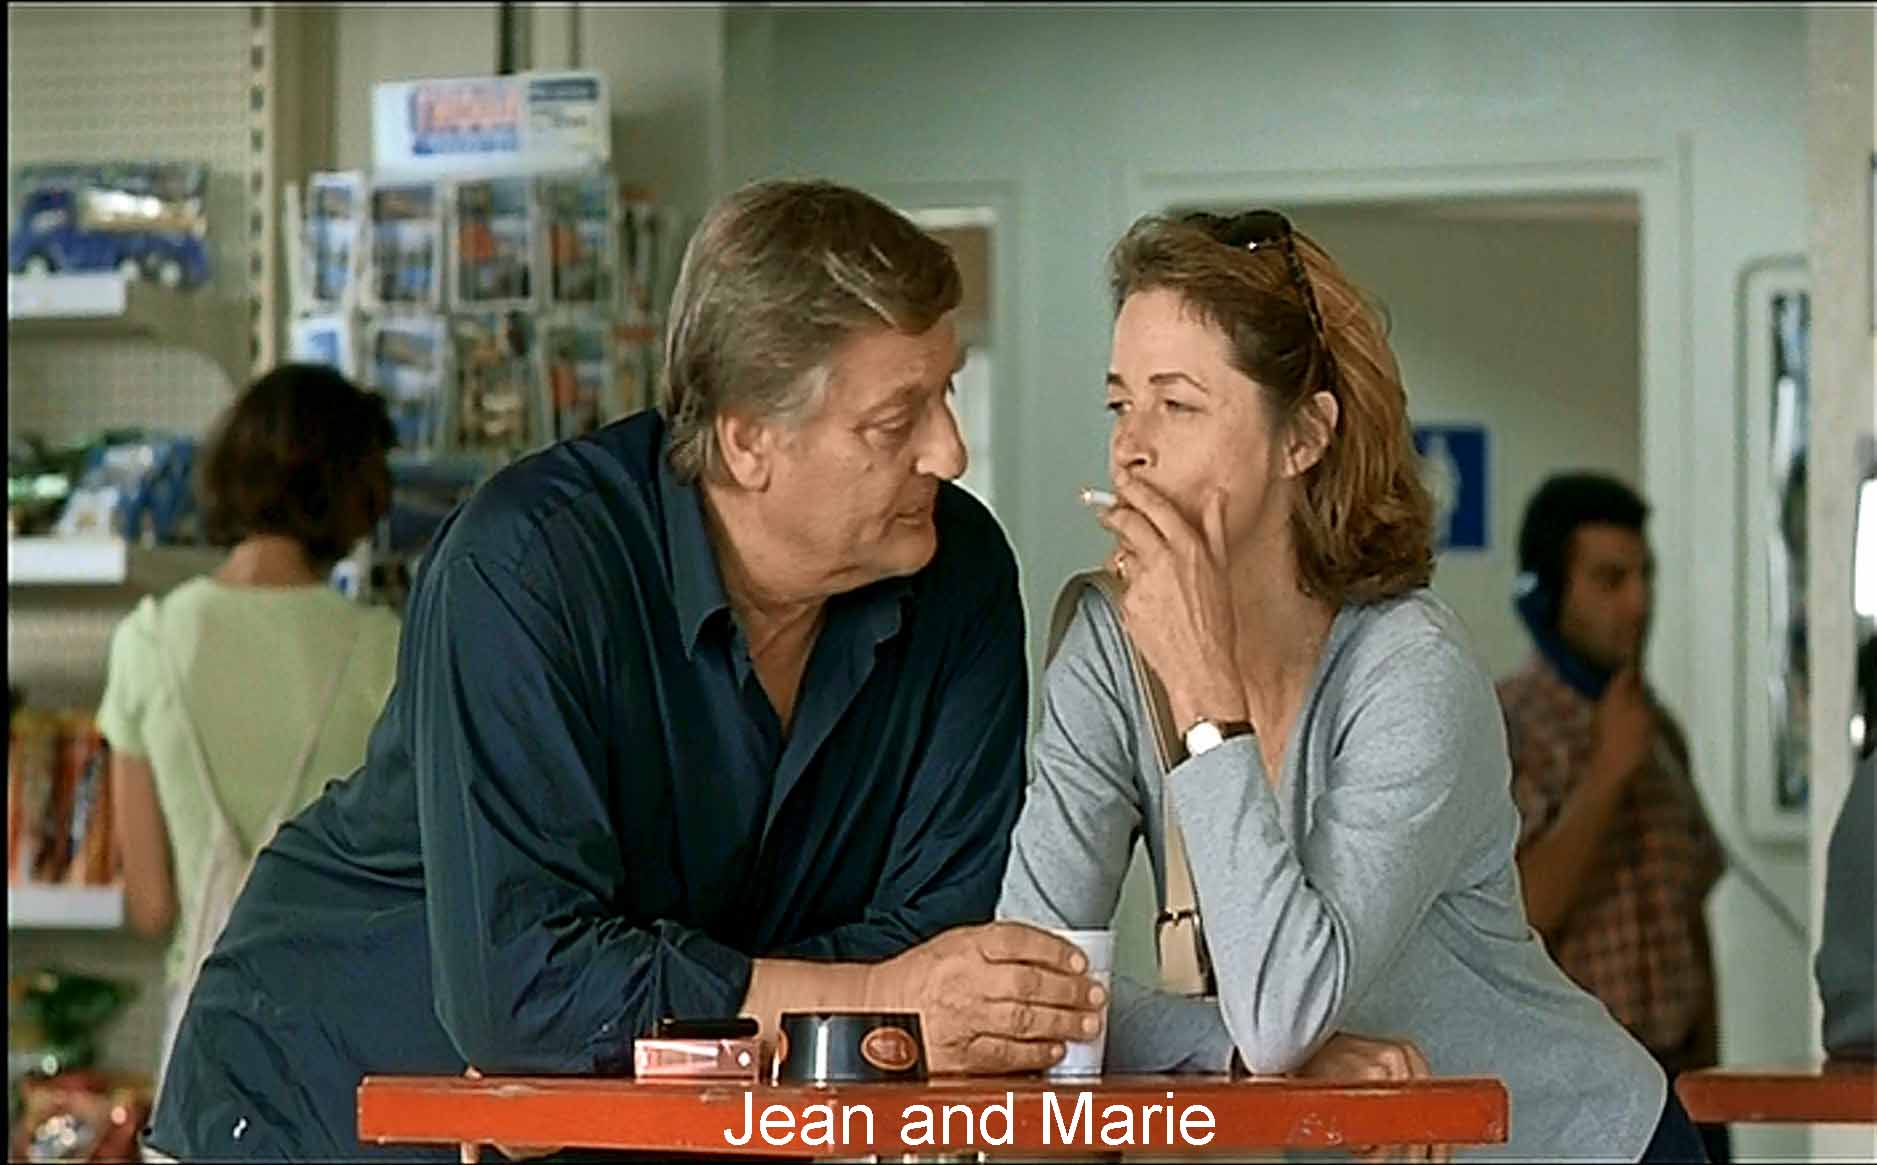 Jean and Marie